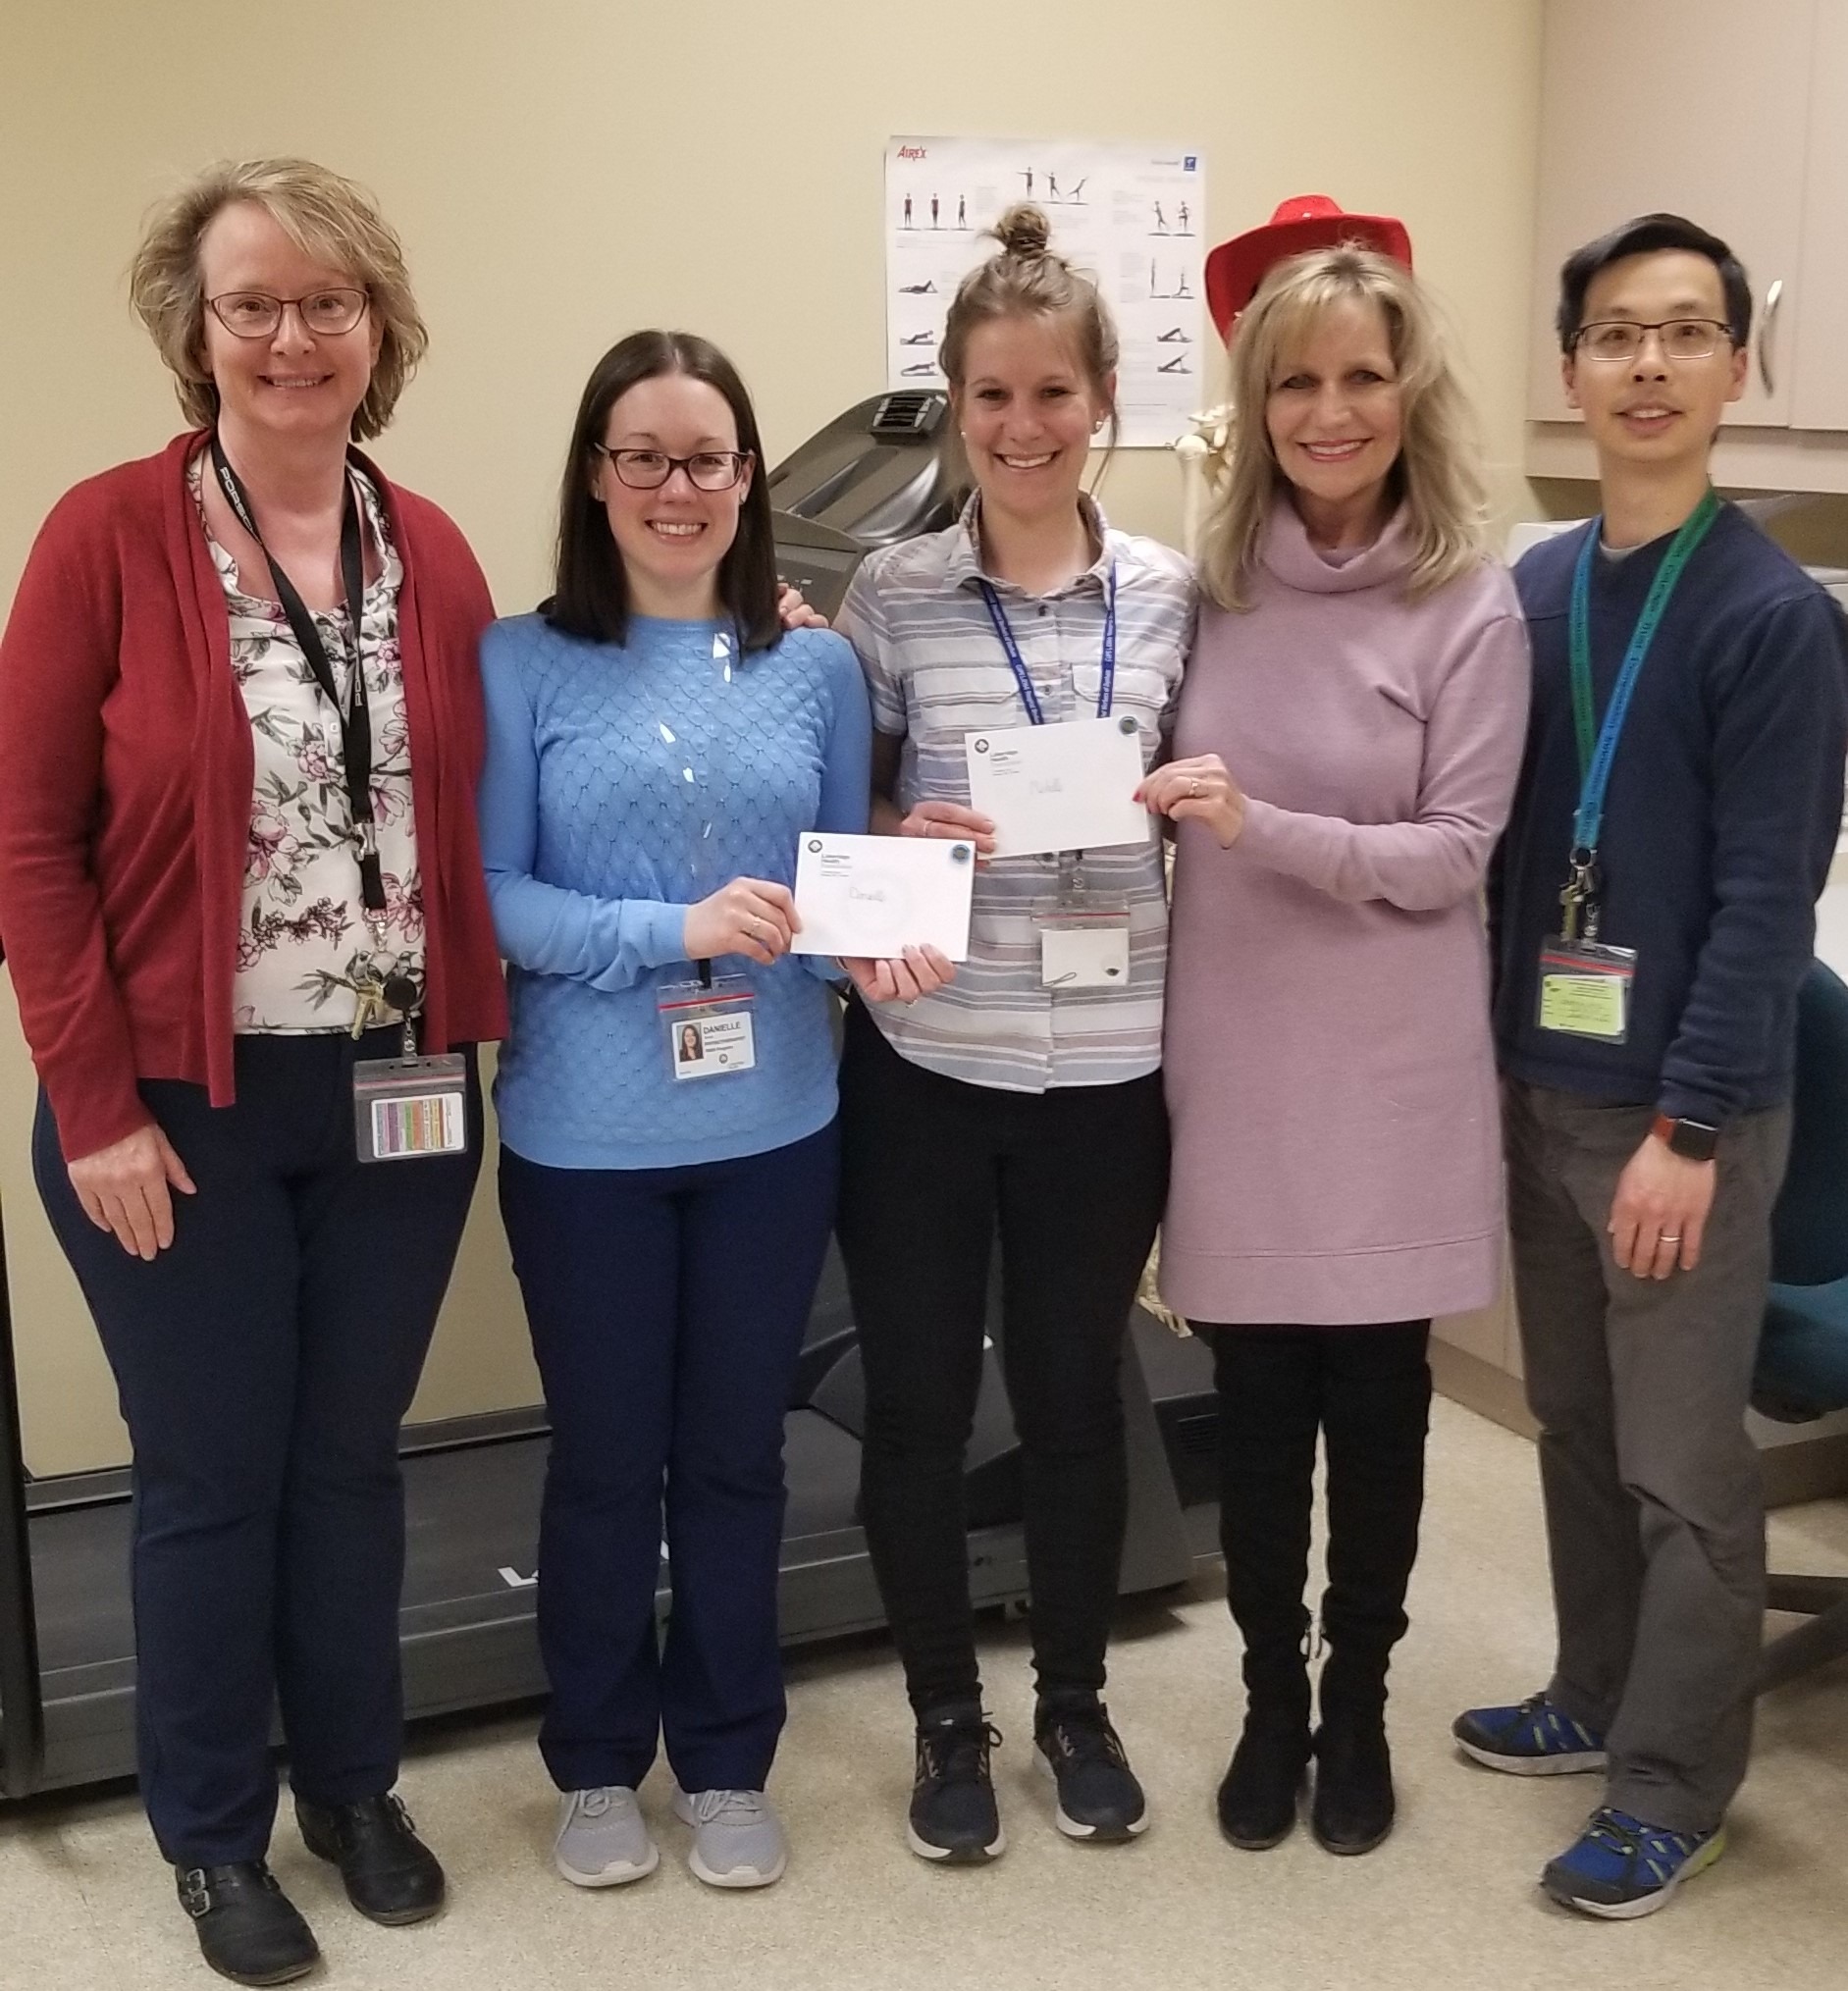 Here, physiotherapists at Lakeridge Health receive Circle of Gratitude recognition for their amazing work with our patients